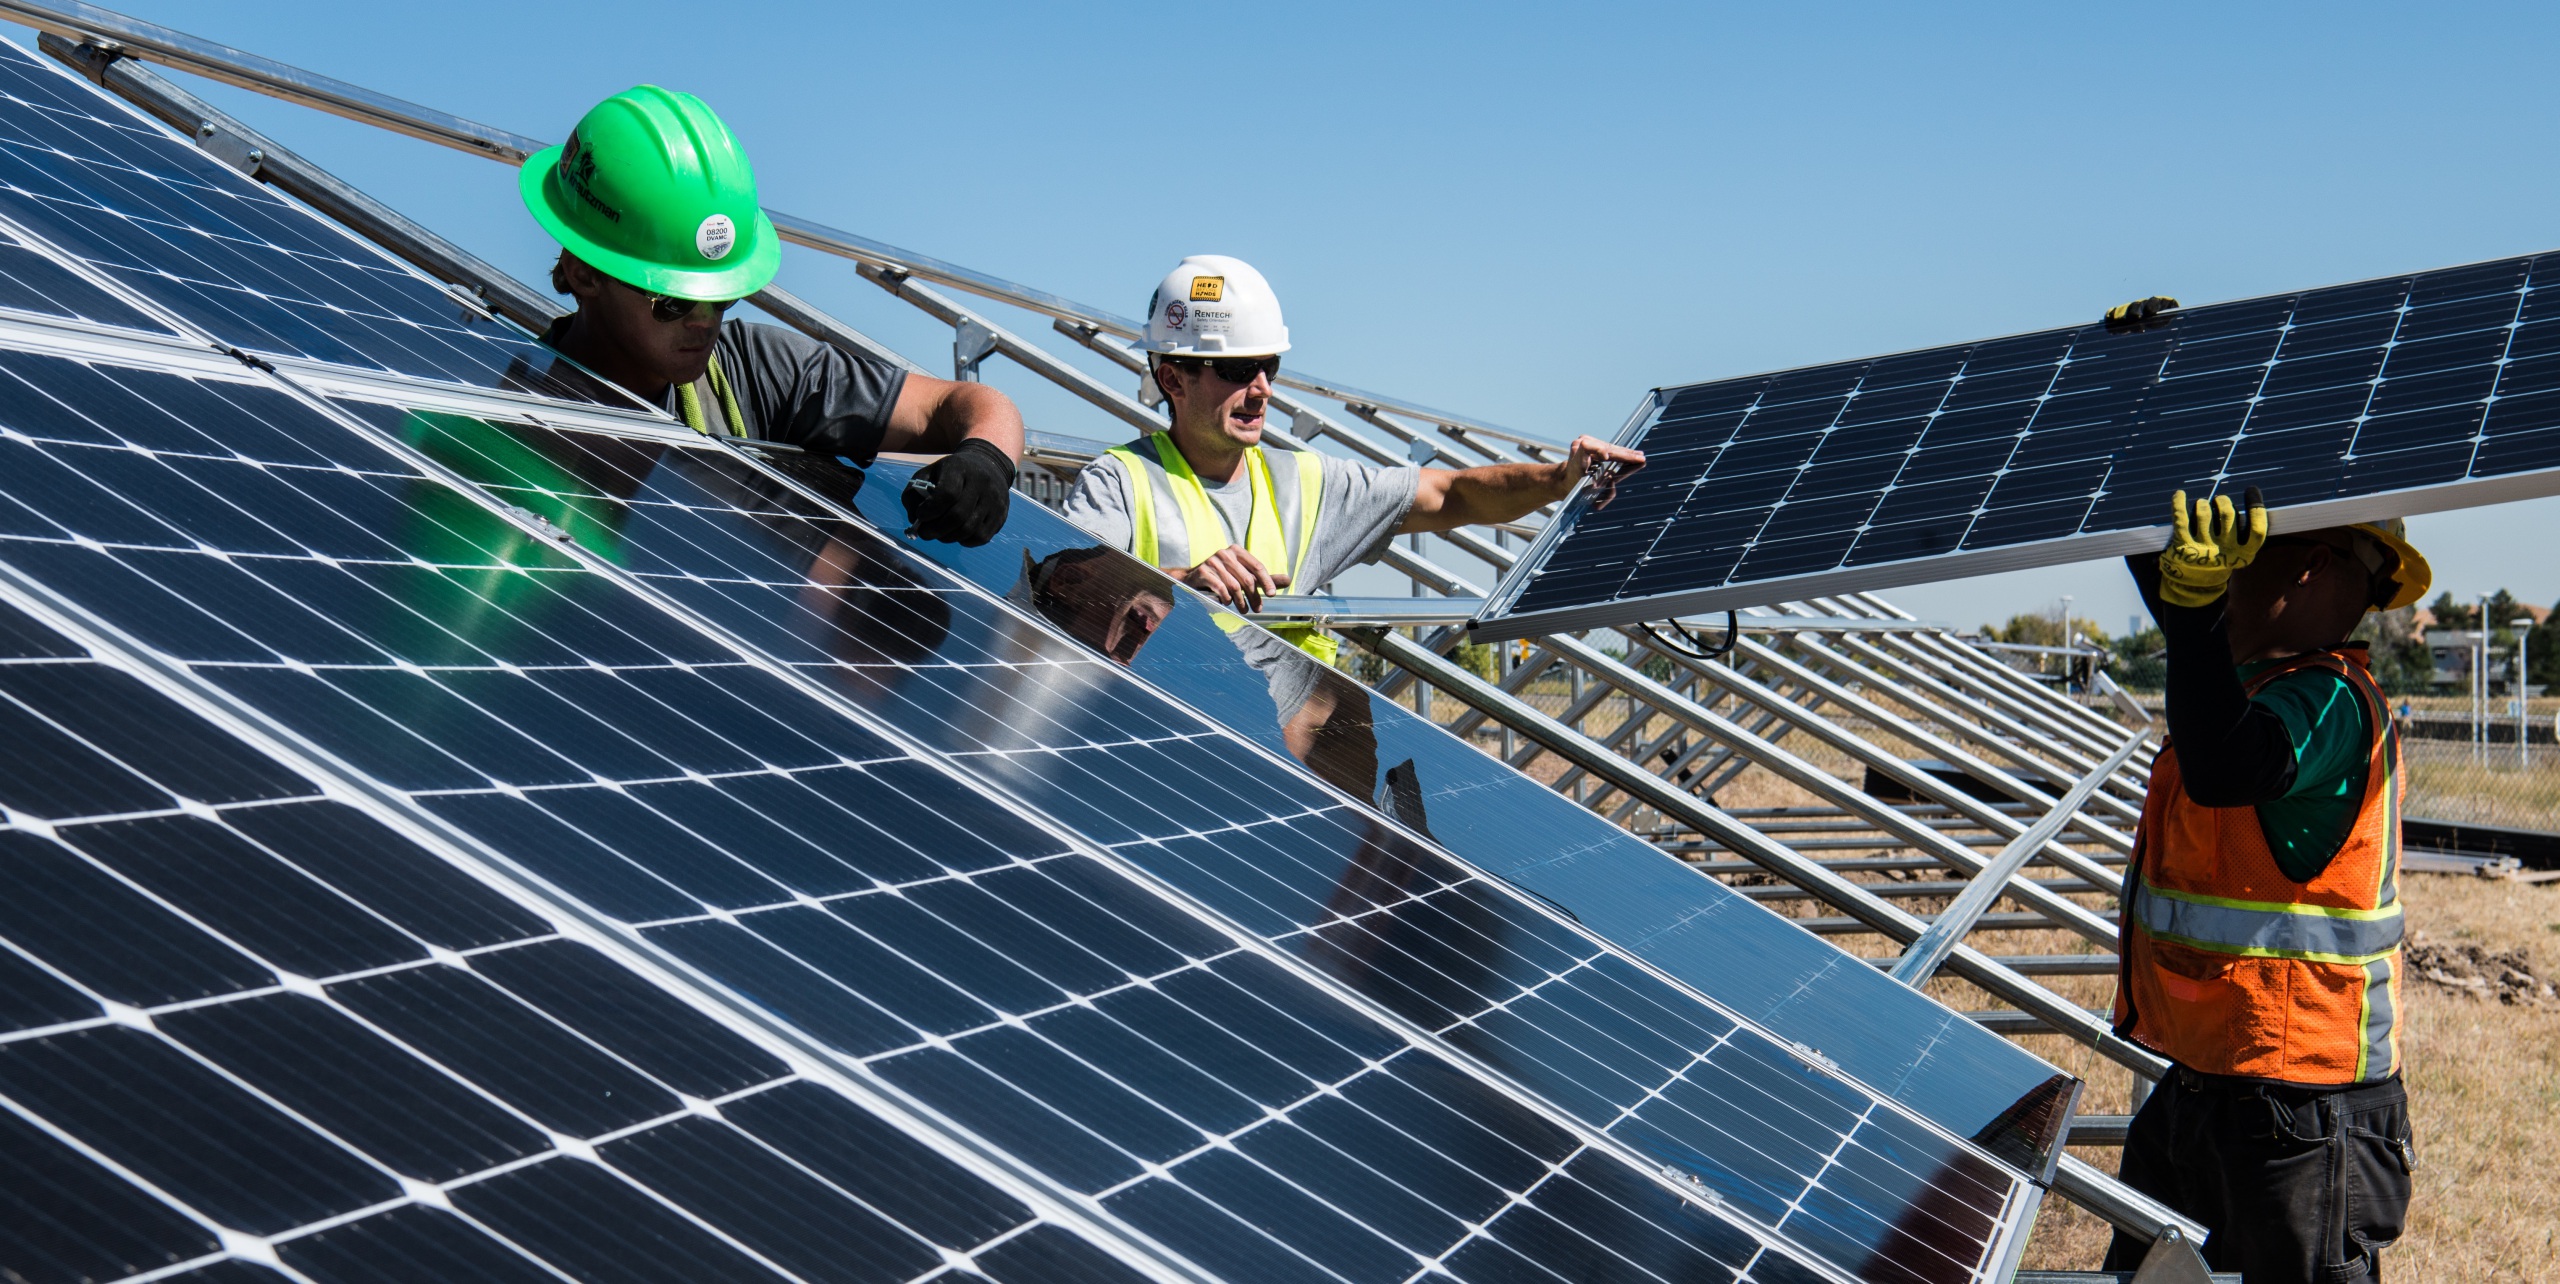 Solar power in cities is growing fast and building on its own success. Environment America